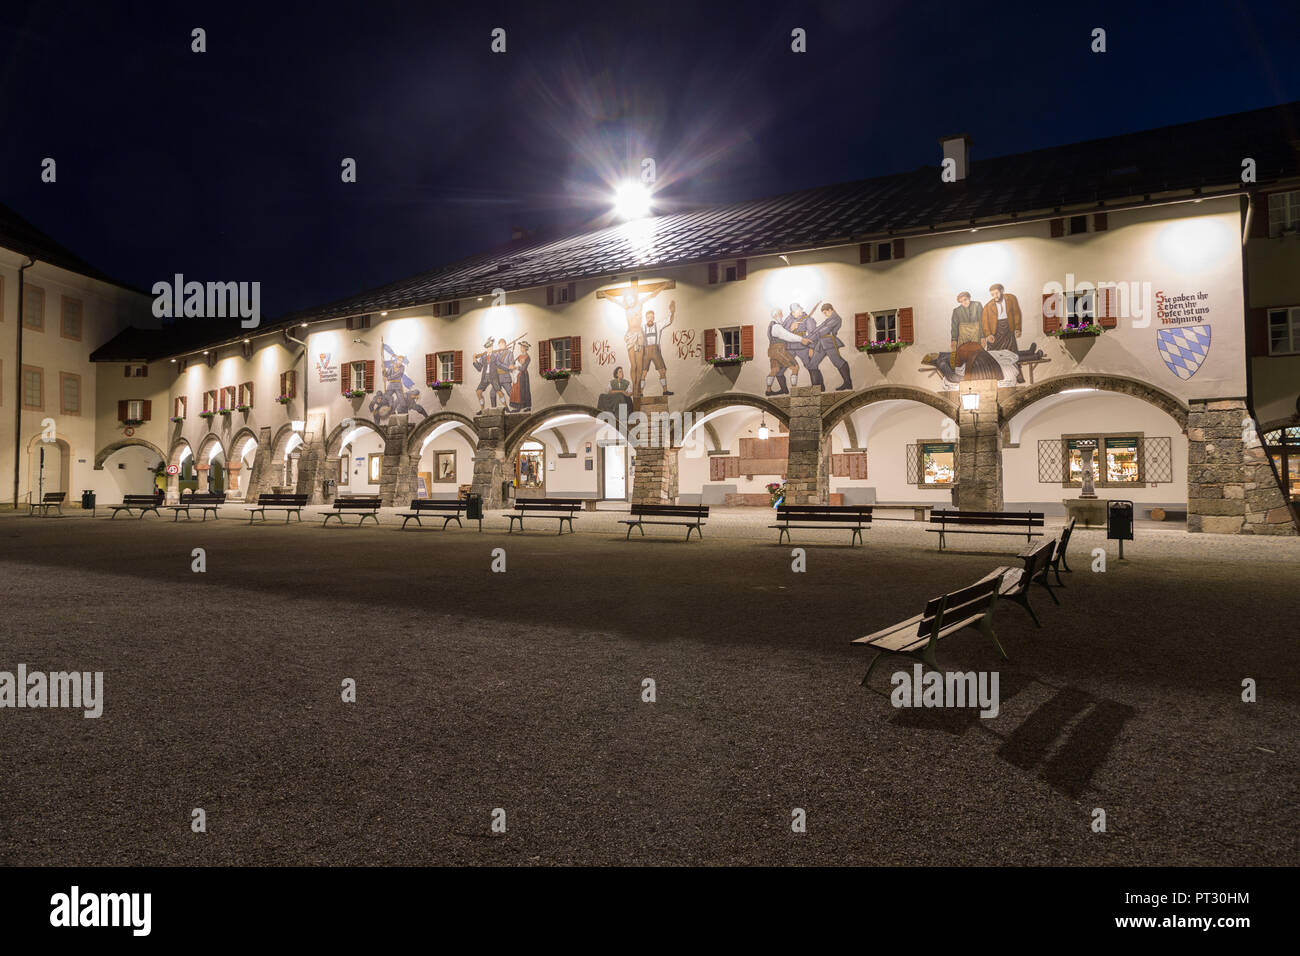 Arcades on castle square at night, Berchtesgaden Castle, Berchtesgaden, Berchtesgadener Land, Bavaria, Germany Stock Photo